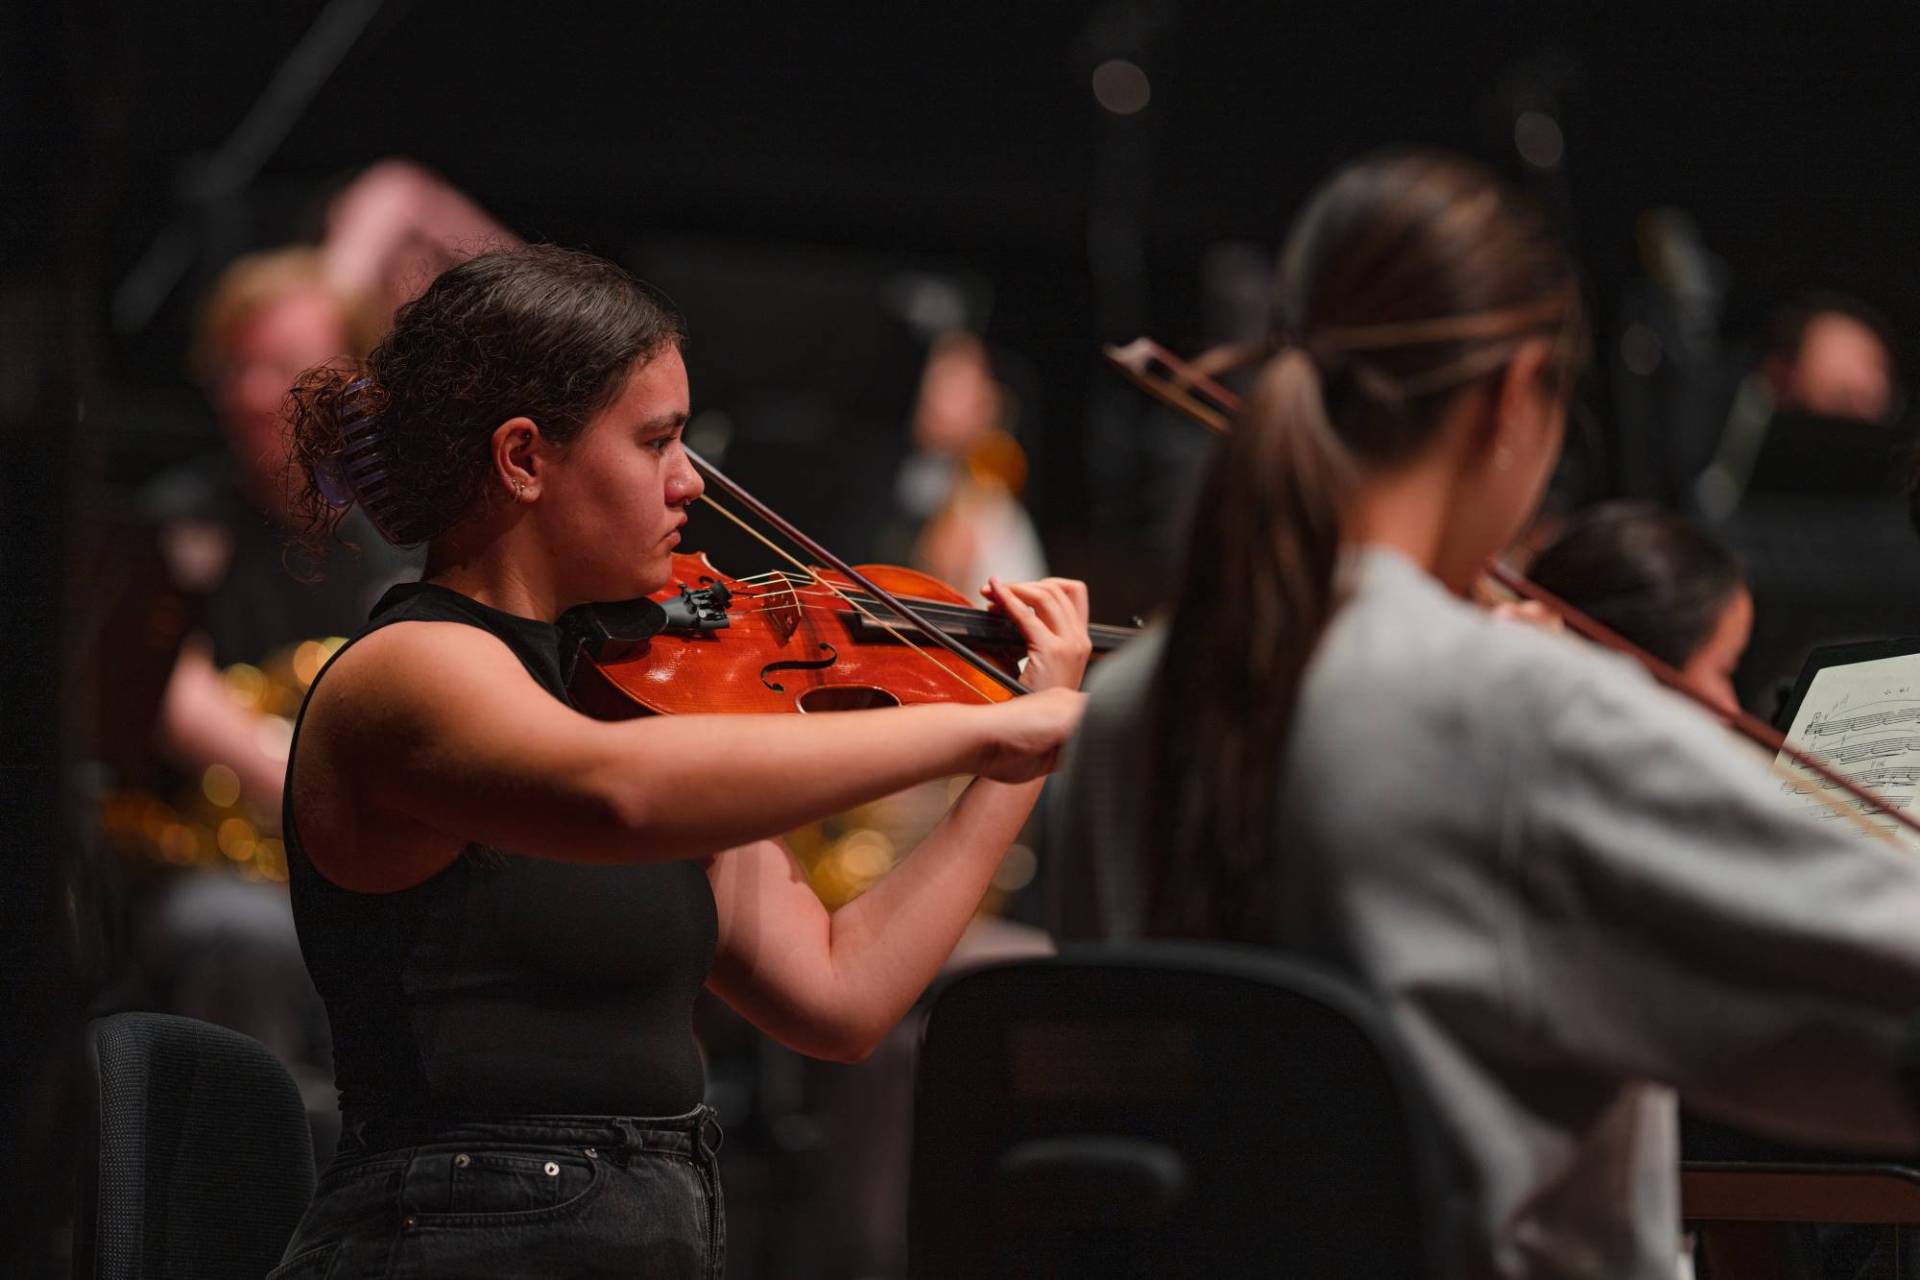 A violist of the Australian Youth Orchestra during rehearsal in the Perth Concert Hall. She is wearing a sleeveless black top and has her hair in a bun. Credit Edify Media 2023